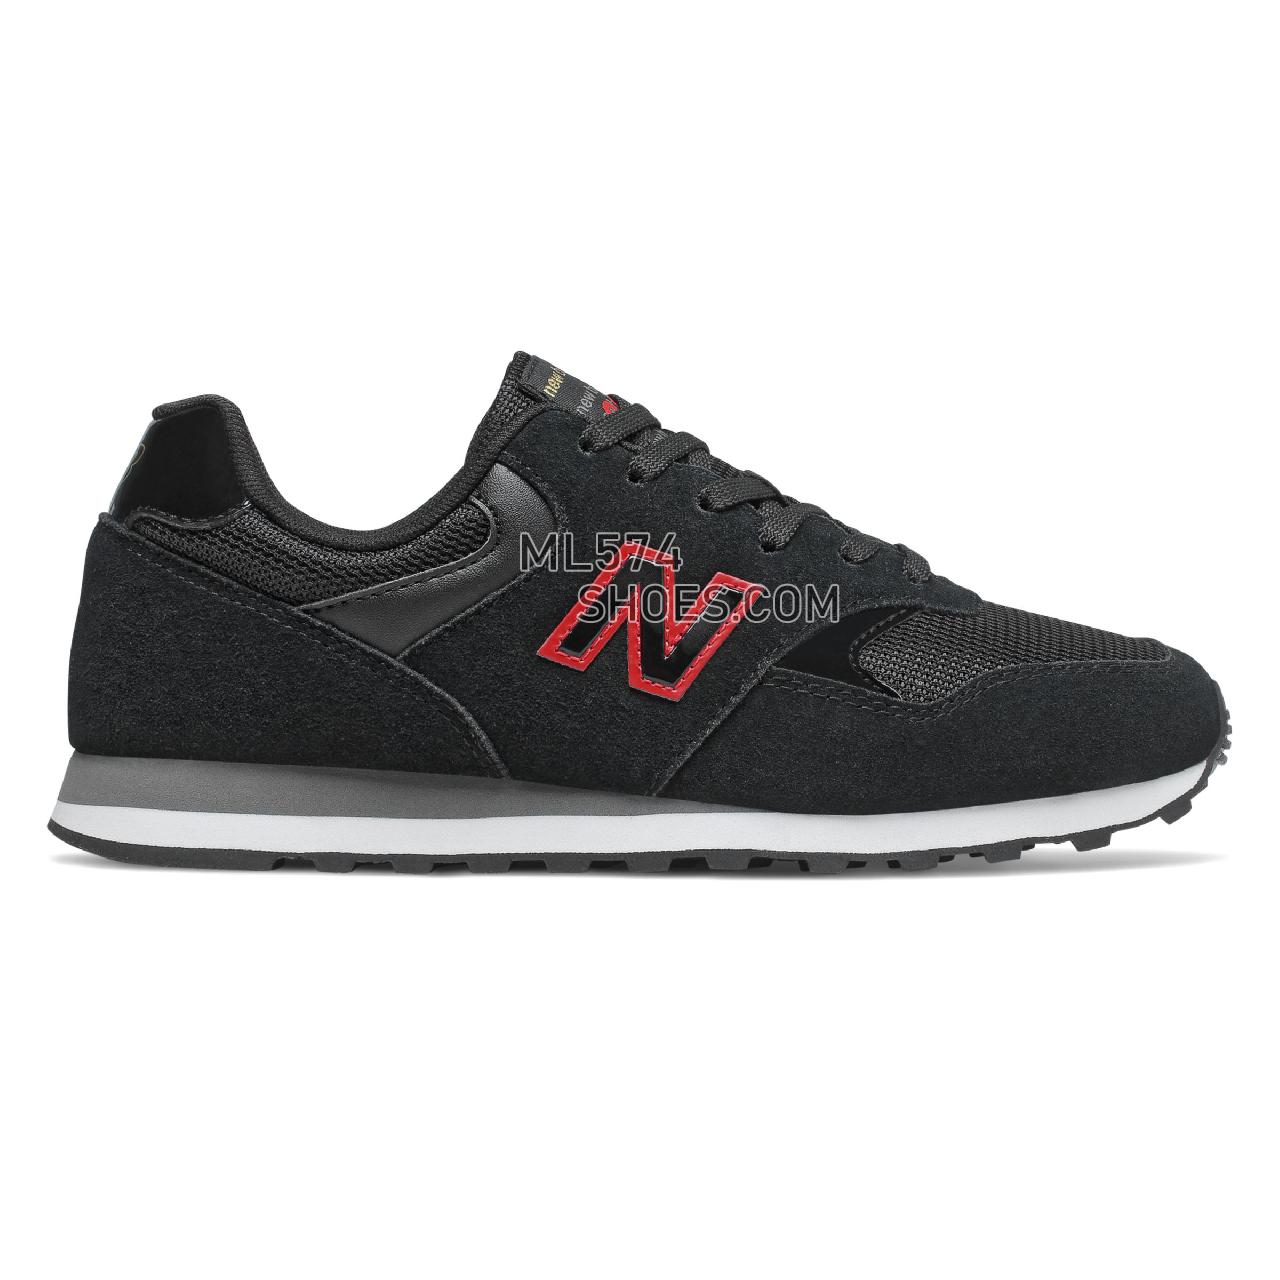 New Balance 393 - Women's Classic Sneakers - Black with Red - WL393MA1